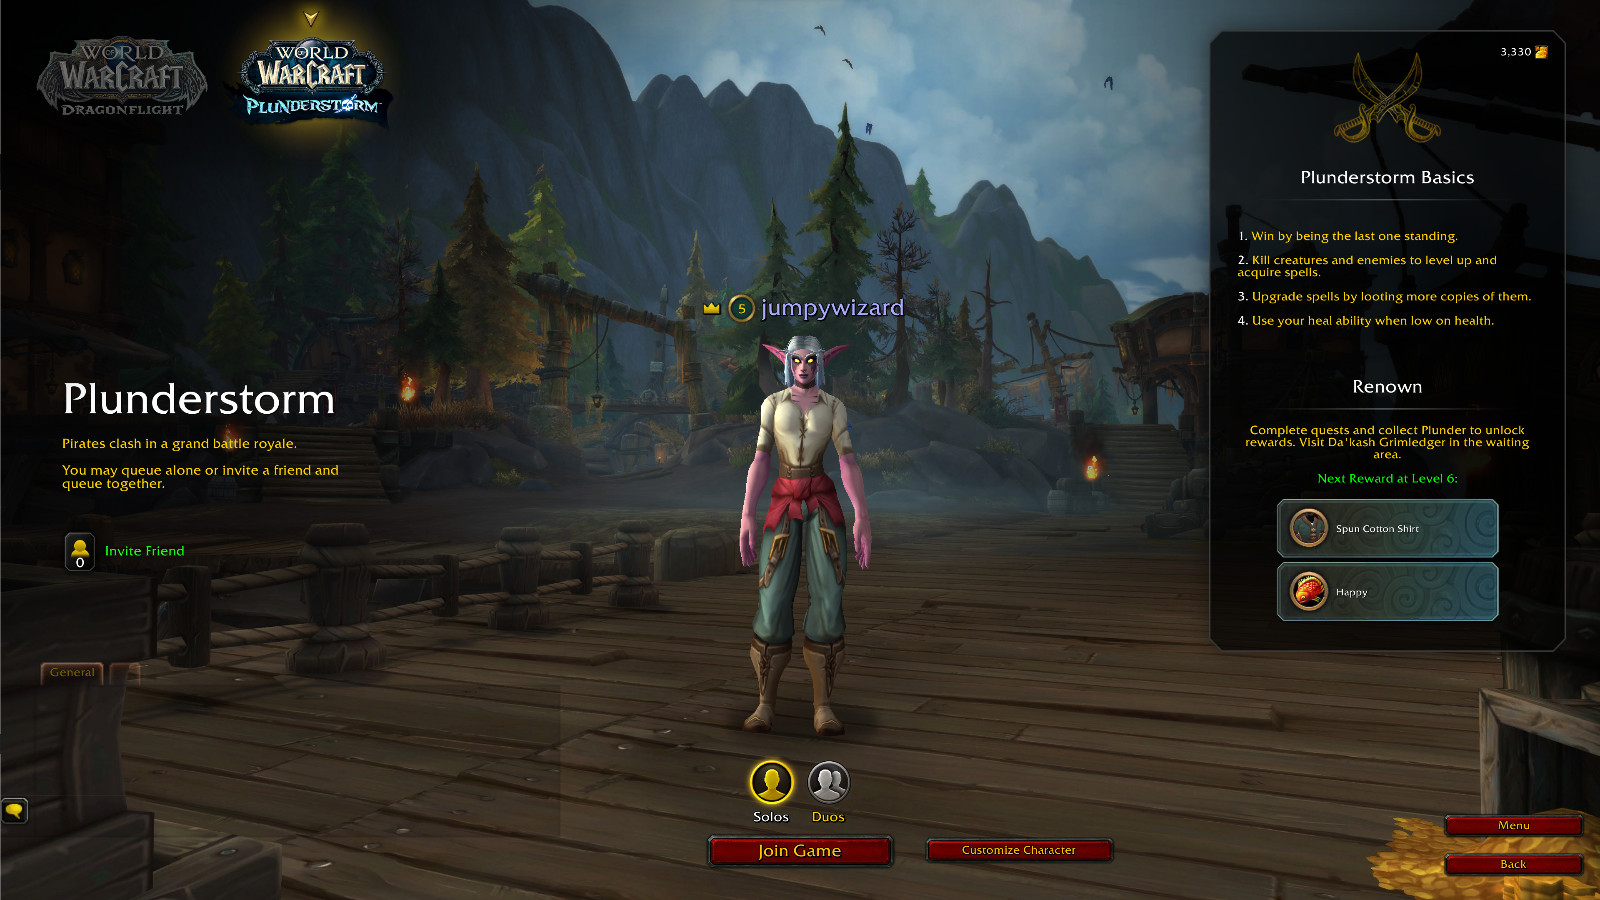 WoW_Dragonflight_Plunderstorm_Character_Select_Screen_035